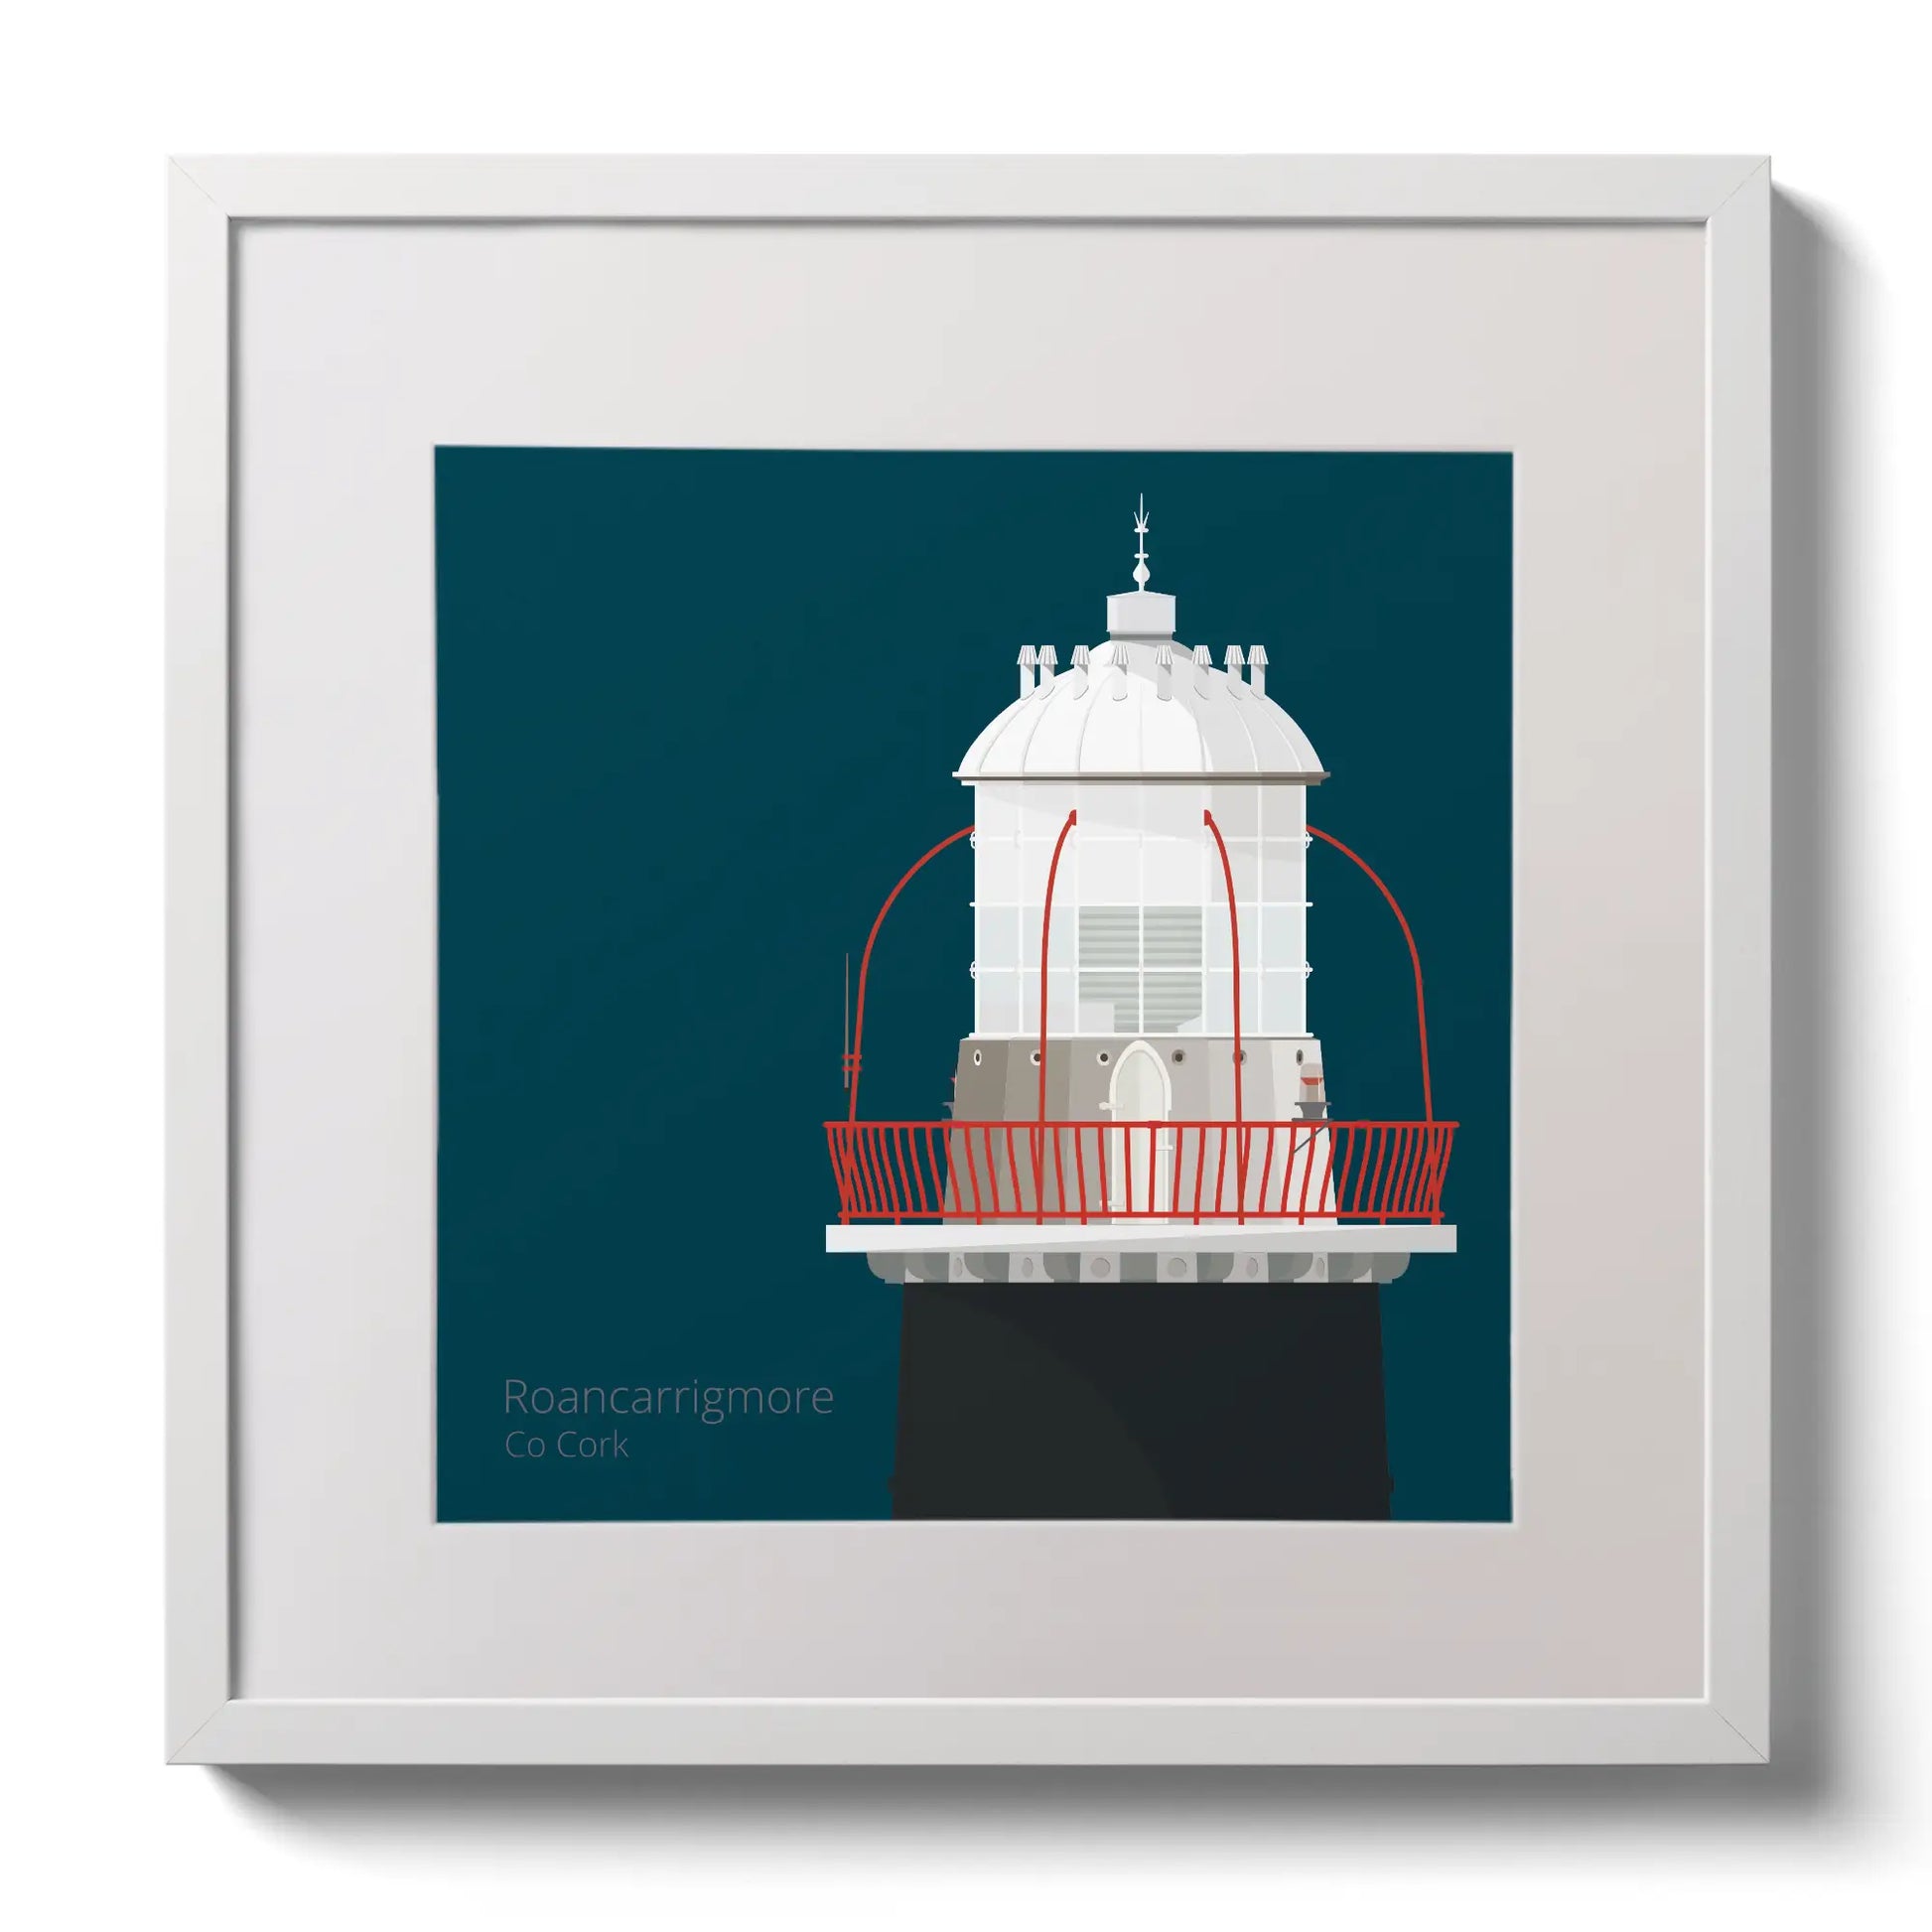 Illustration of Roancarrigmore lighthouse on a midnight blue background,  in a white square frame measuring 30x30cm.